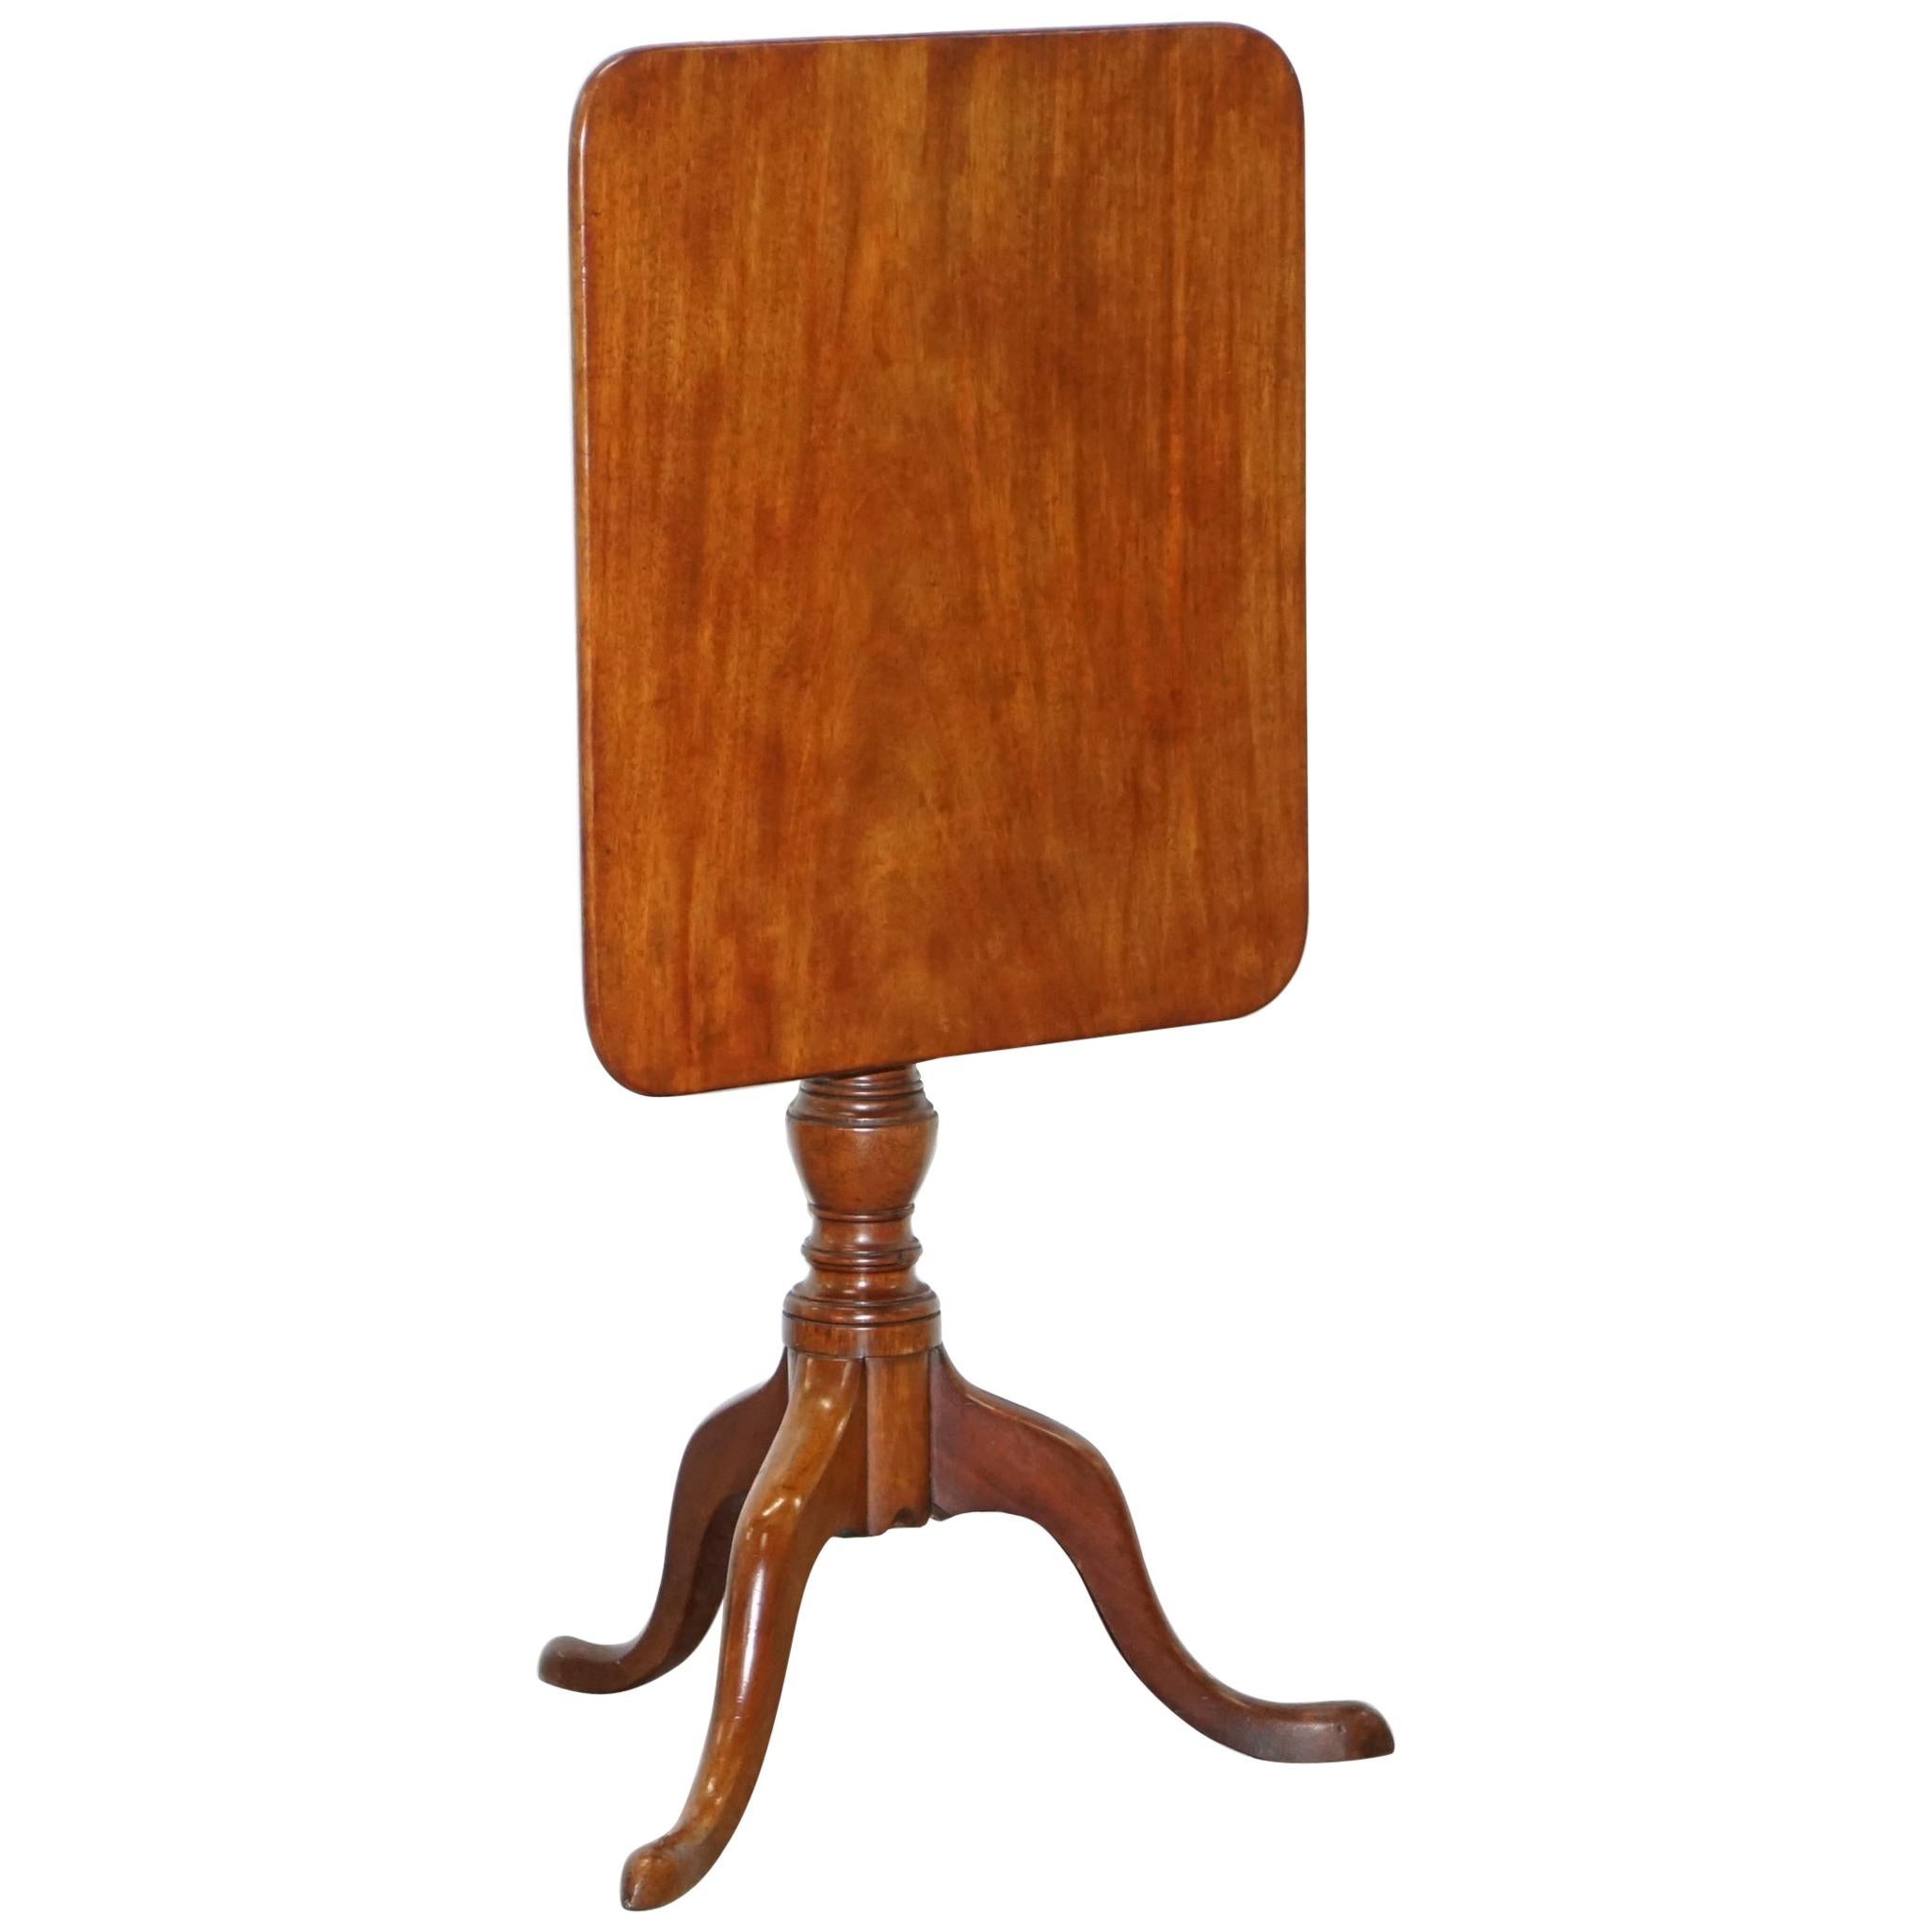 Victorian Tripod Side End Lamp Table in Walnut with Tilt Top Function circa 1860